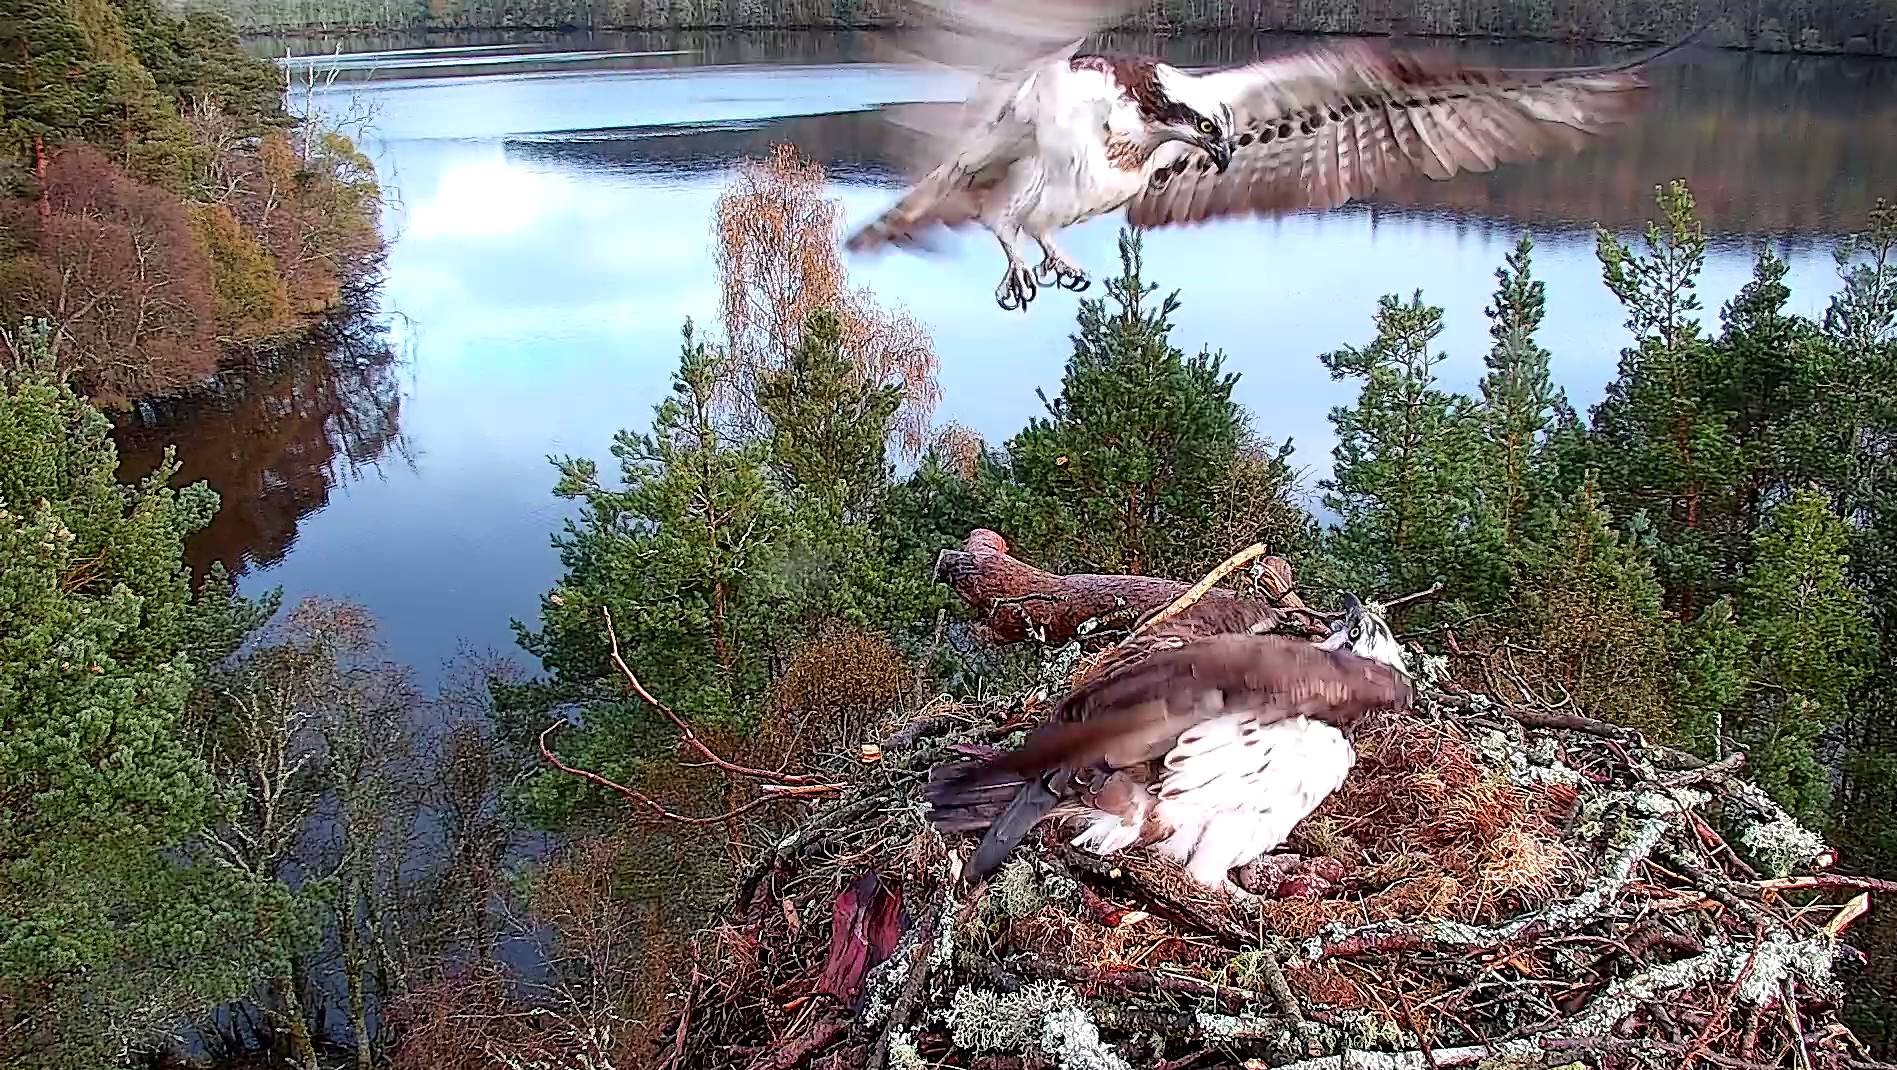 Tough Times at the Osprey Nest